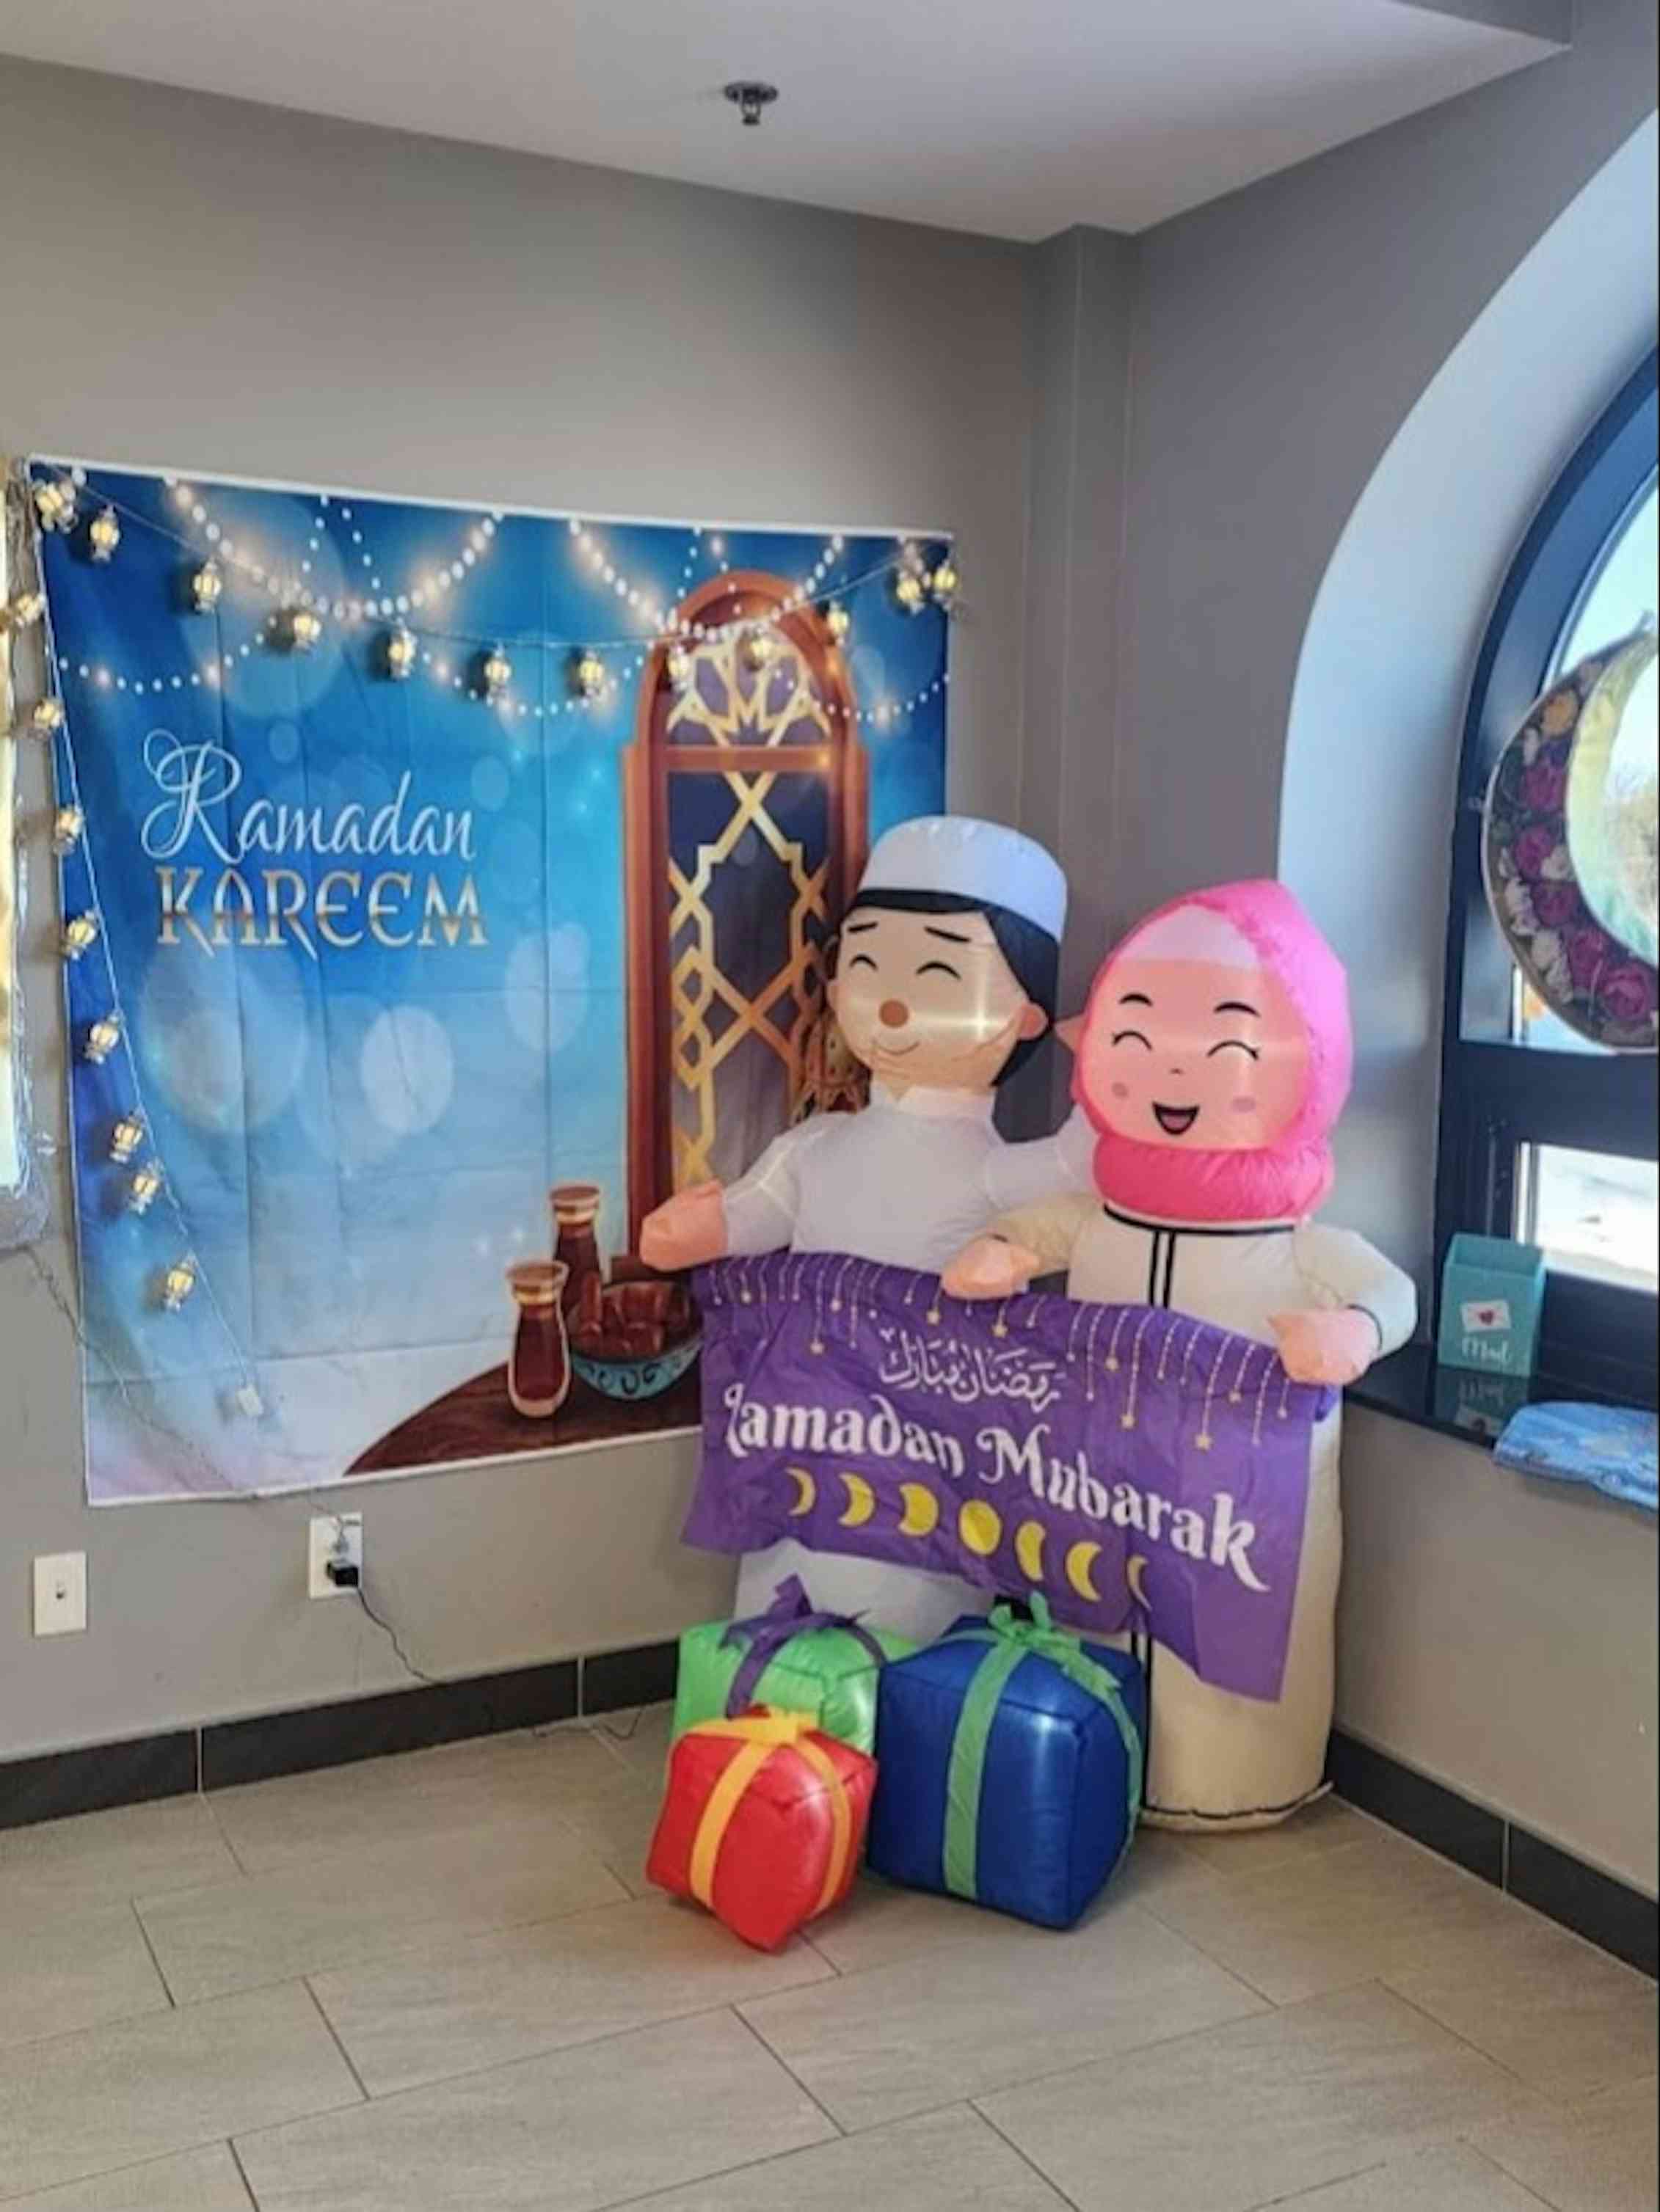 Decor seen in a school hallway of a sign saying 'Ramadan Kareem' with two smiling figures and presents in front of them.